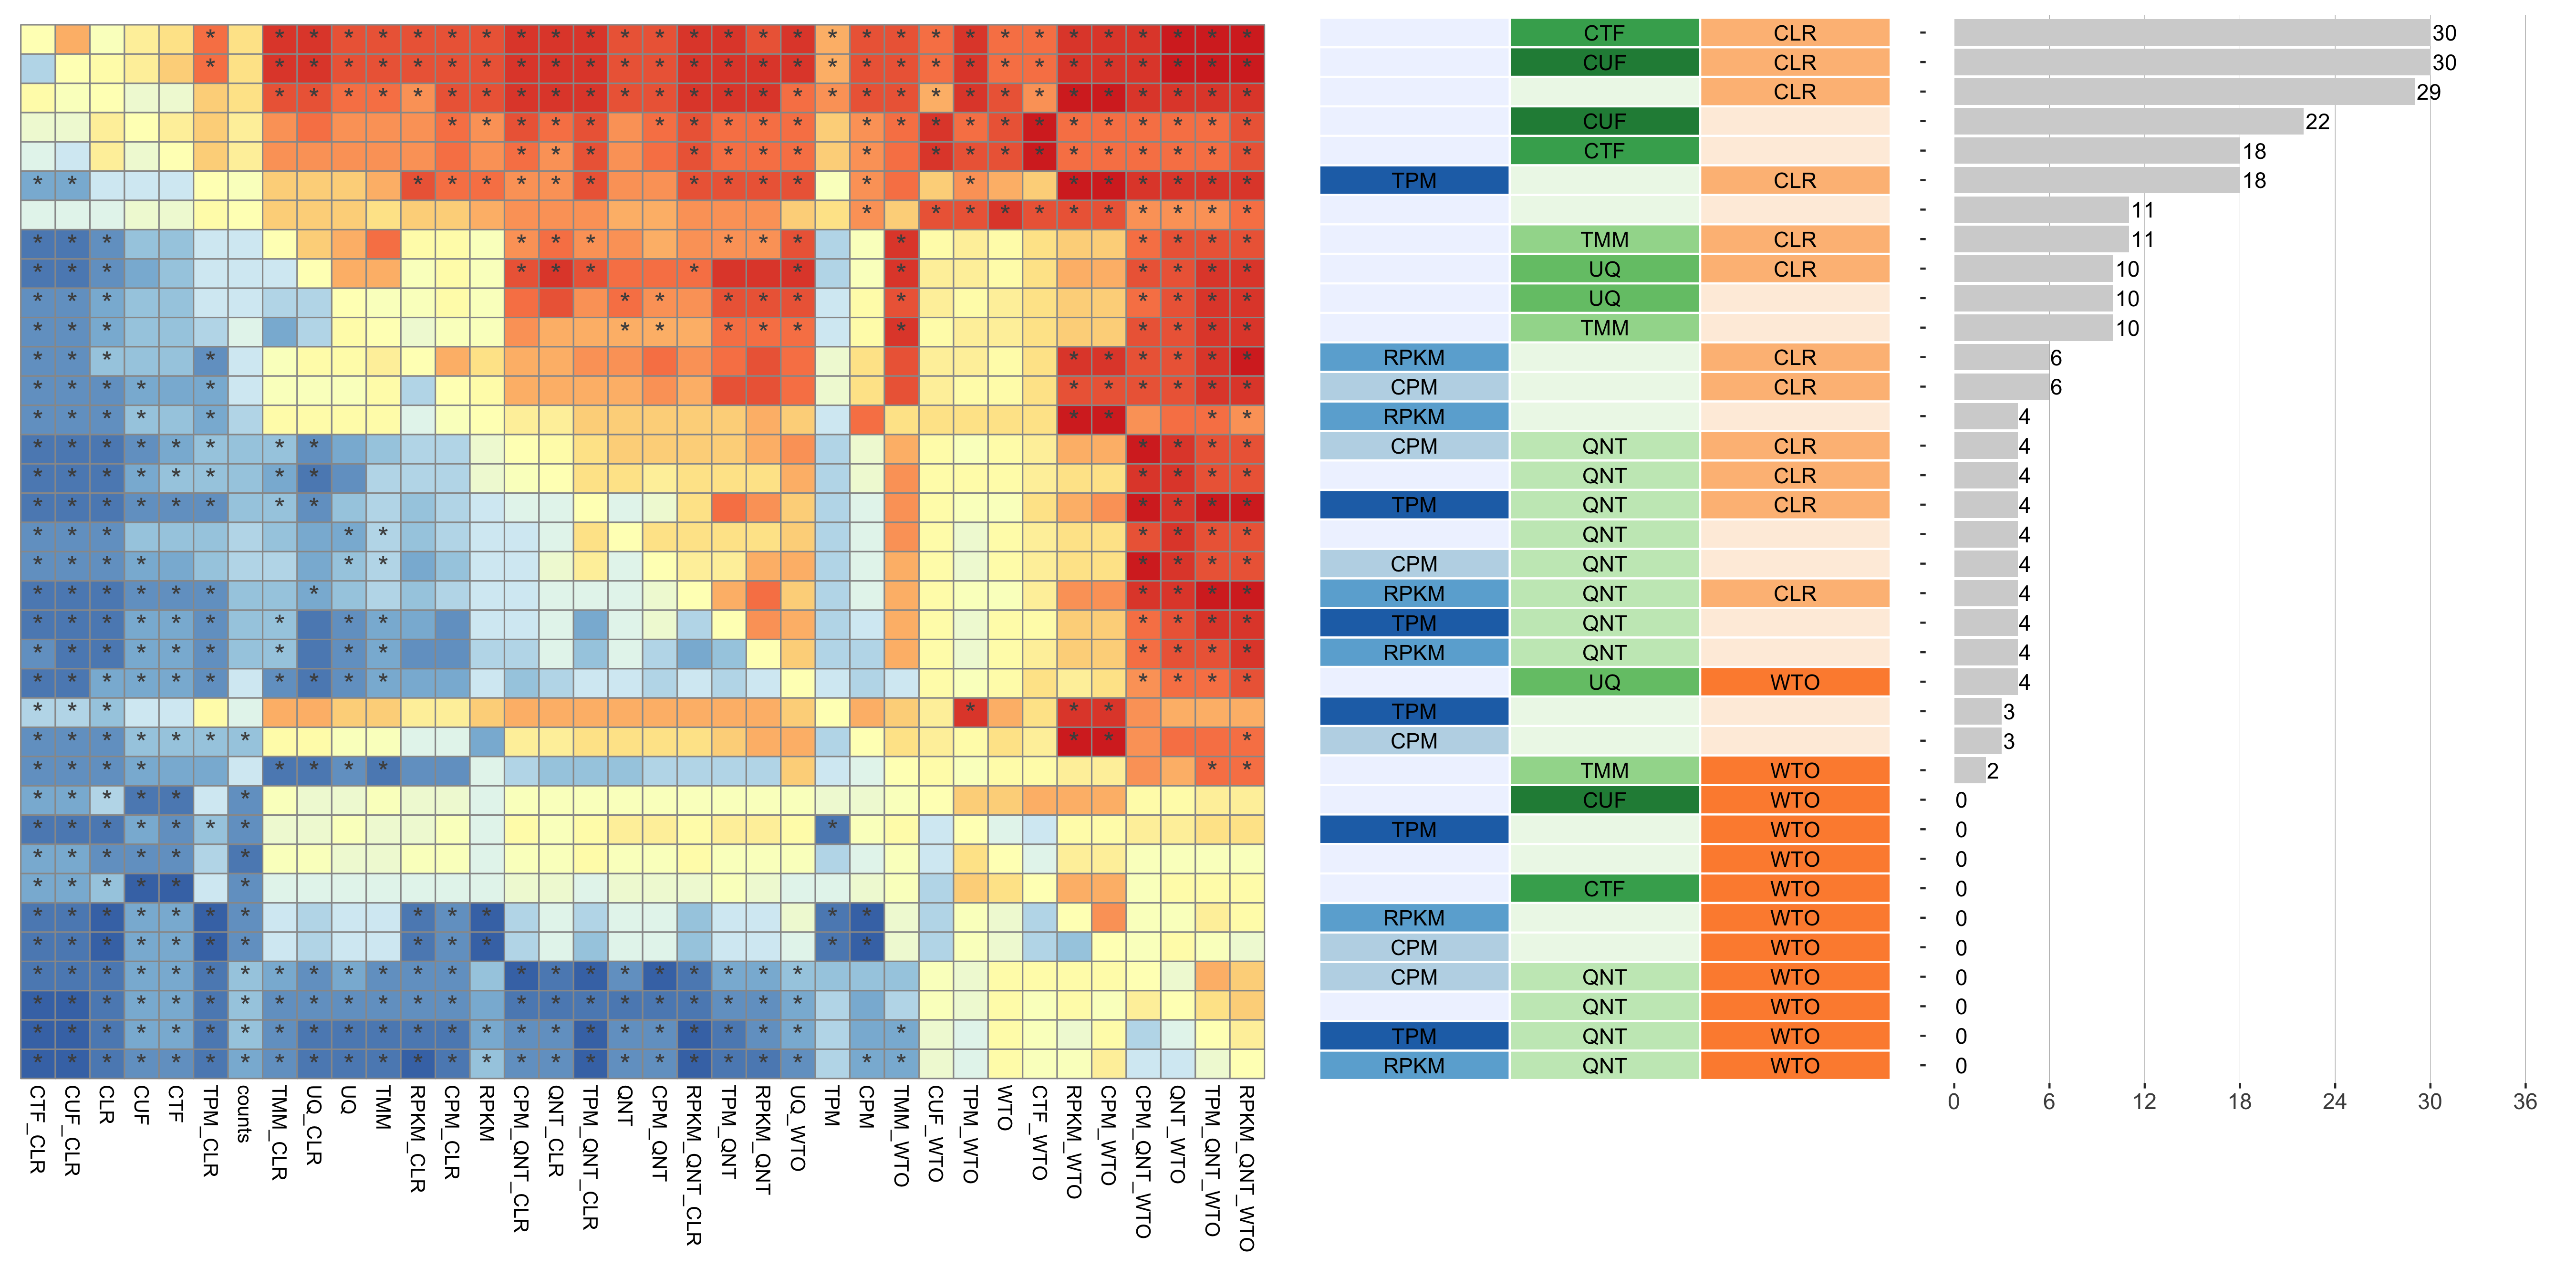 **Dataset-level pairwise comparison of workflow performance.** (**left**) The heatmap shows the relative performance of a pair of workflows, corresponding to a row and a column, directly compared to each other for the GTEx datasets based on the tissue-aware gold standard. The color in each cell (row, column) represents the proportion of datasets for which the workflow along the row has a higher auROC than the workflow along the column. Comparisons that are statistically significant (corrected p < 0.01) based on a paired Wilcoxon test are marked with an asterisk. (**middle**) The workflows (rows) are described in terms of the specific method used in the within-sample normalization (blues), between-sample normalization (greens), and network transformation (oranges) stages. (**right**) The barplot shows the number of times each workflow was significantly greater than another workflow.